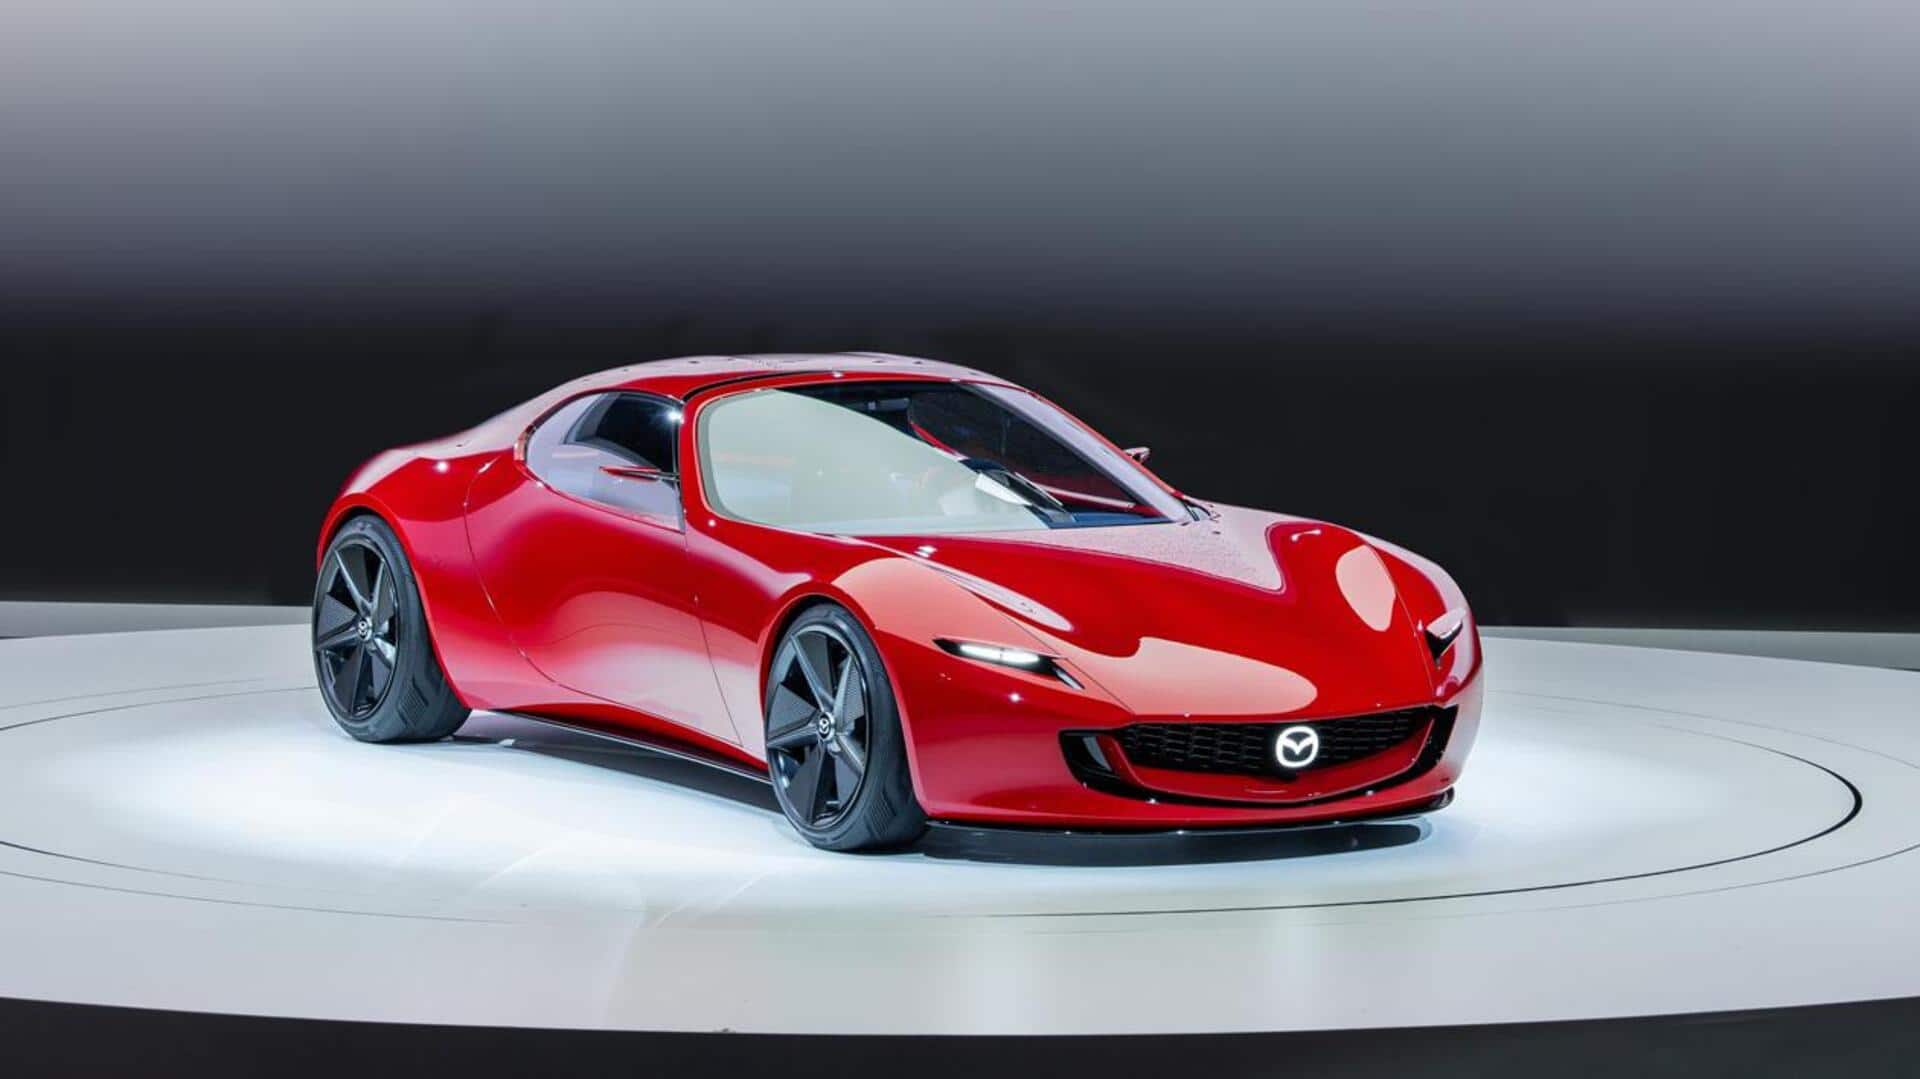 MAZDA ICONIC SP concept debuts at Japan Mobility Show